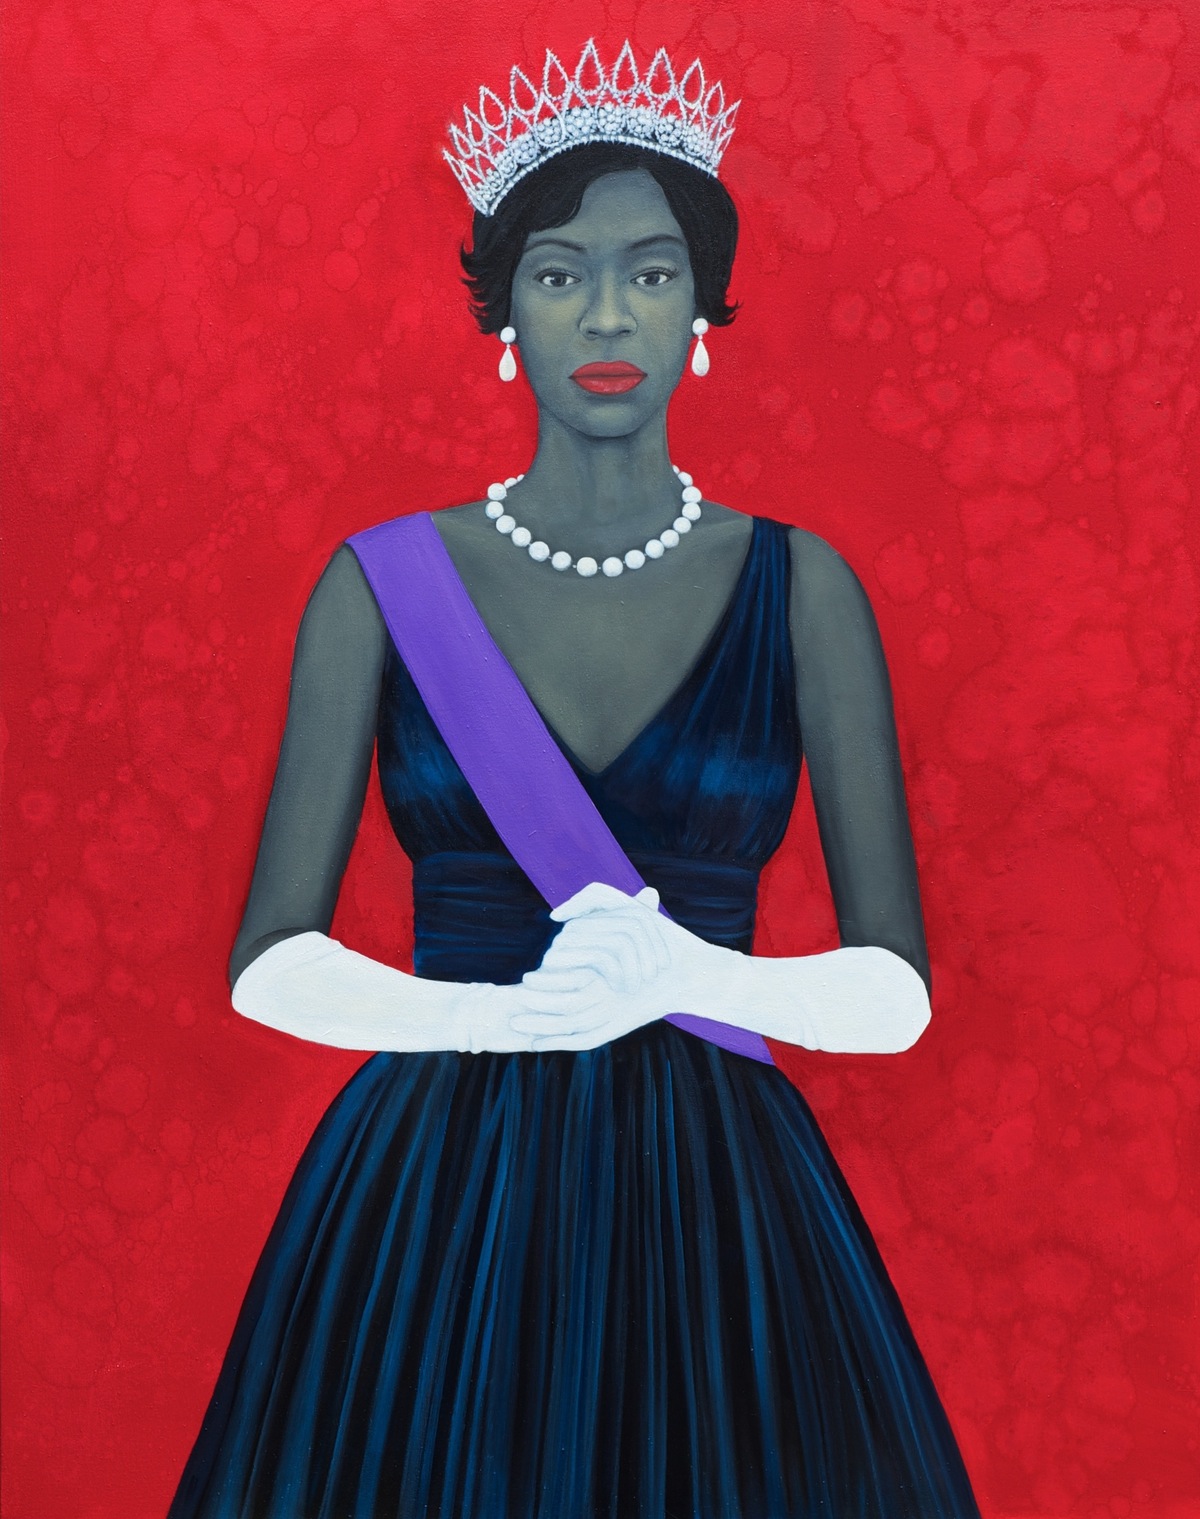 Framed Amy Sherald Grand Dame Queenie Art Poster Print 47 36 24 16 Inches 